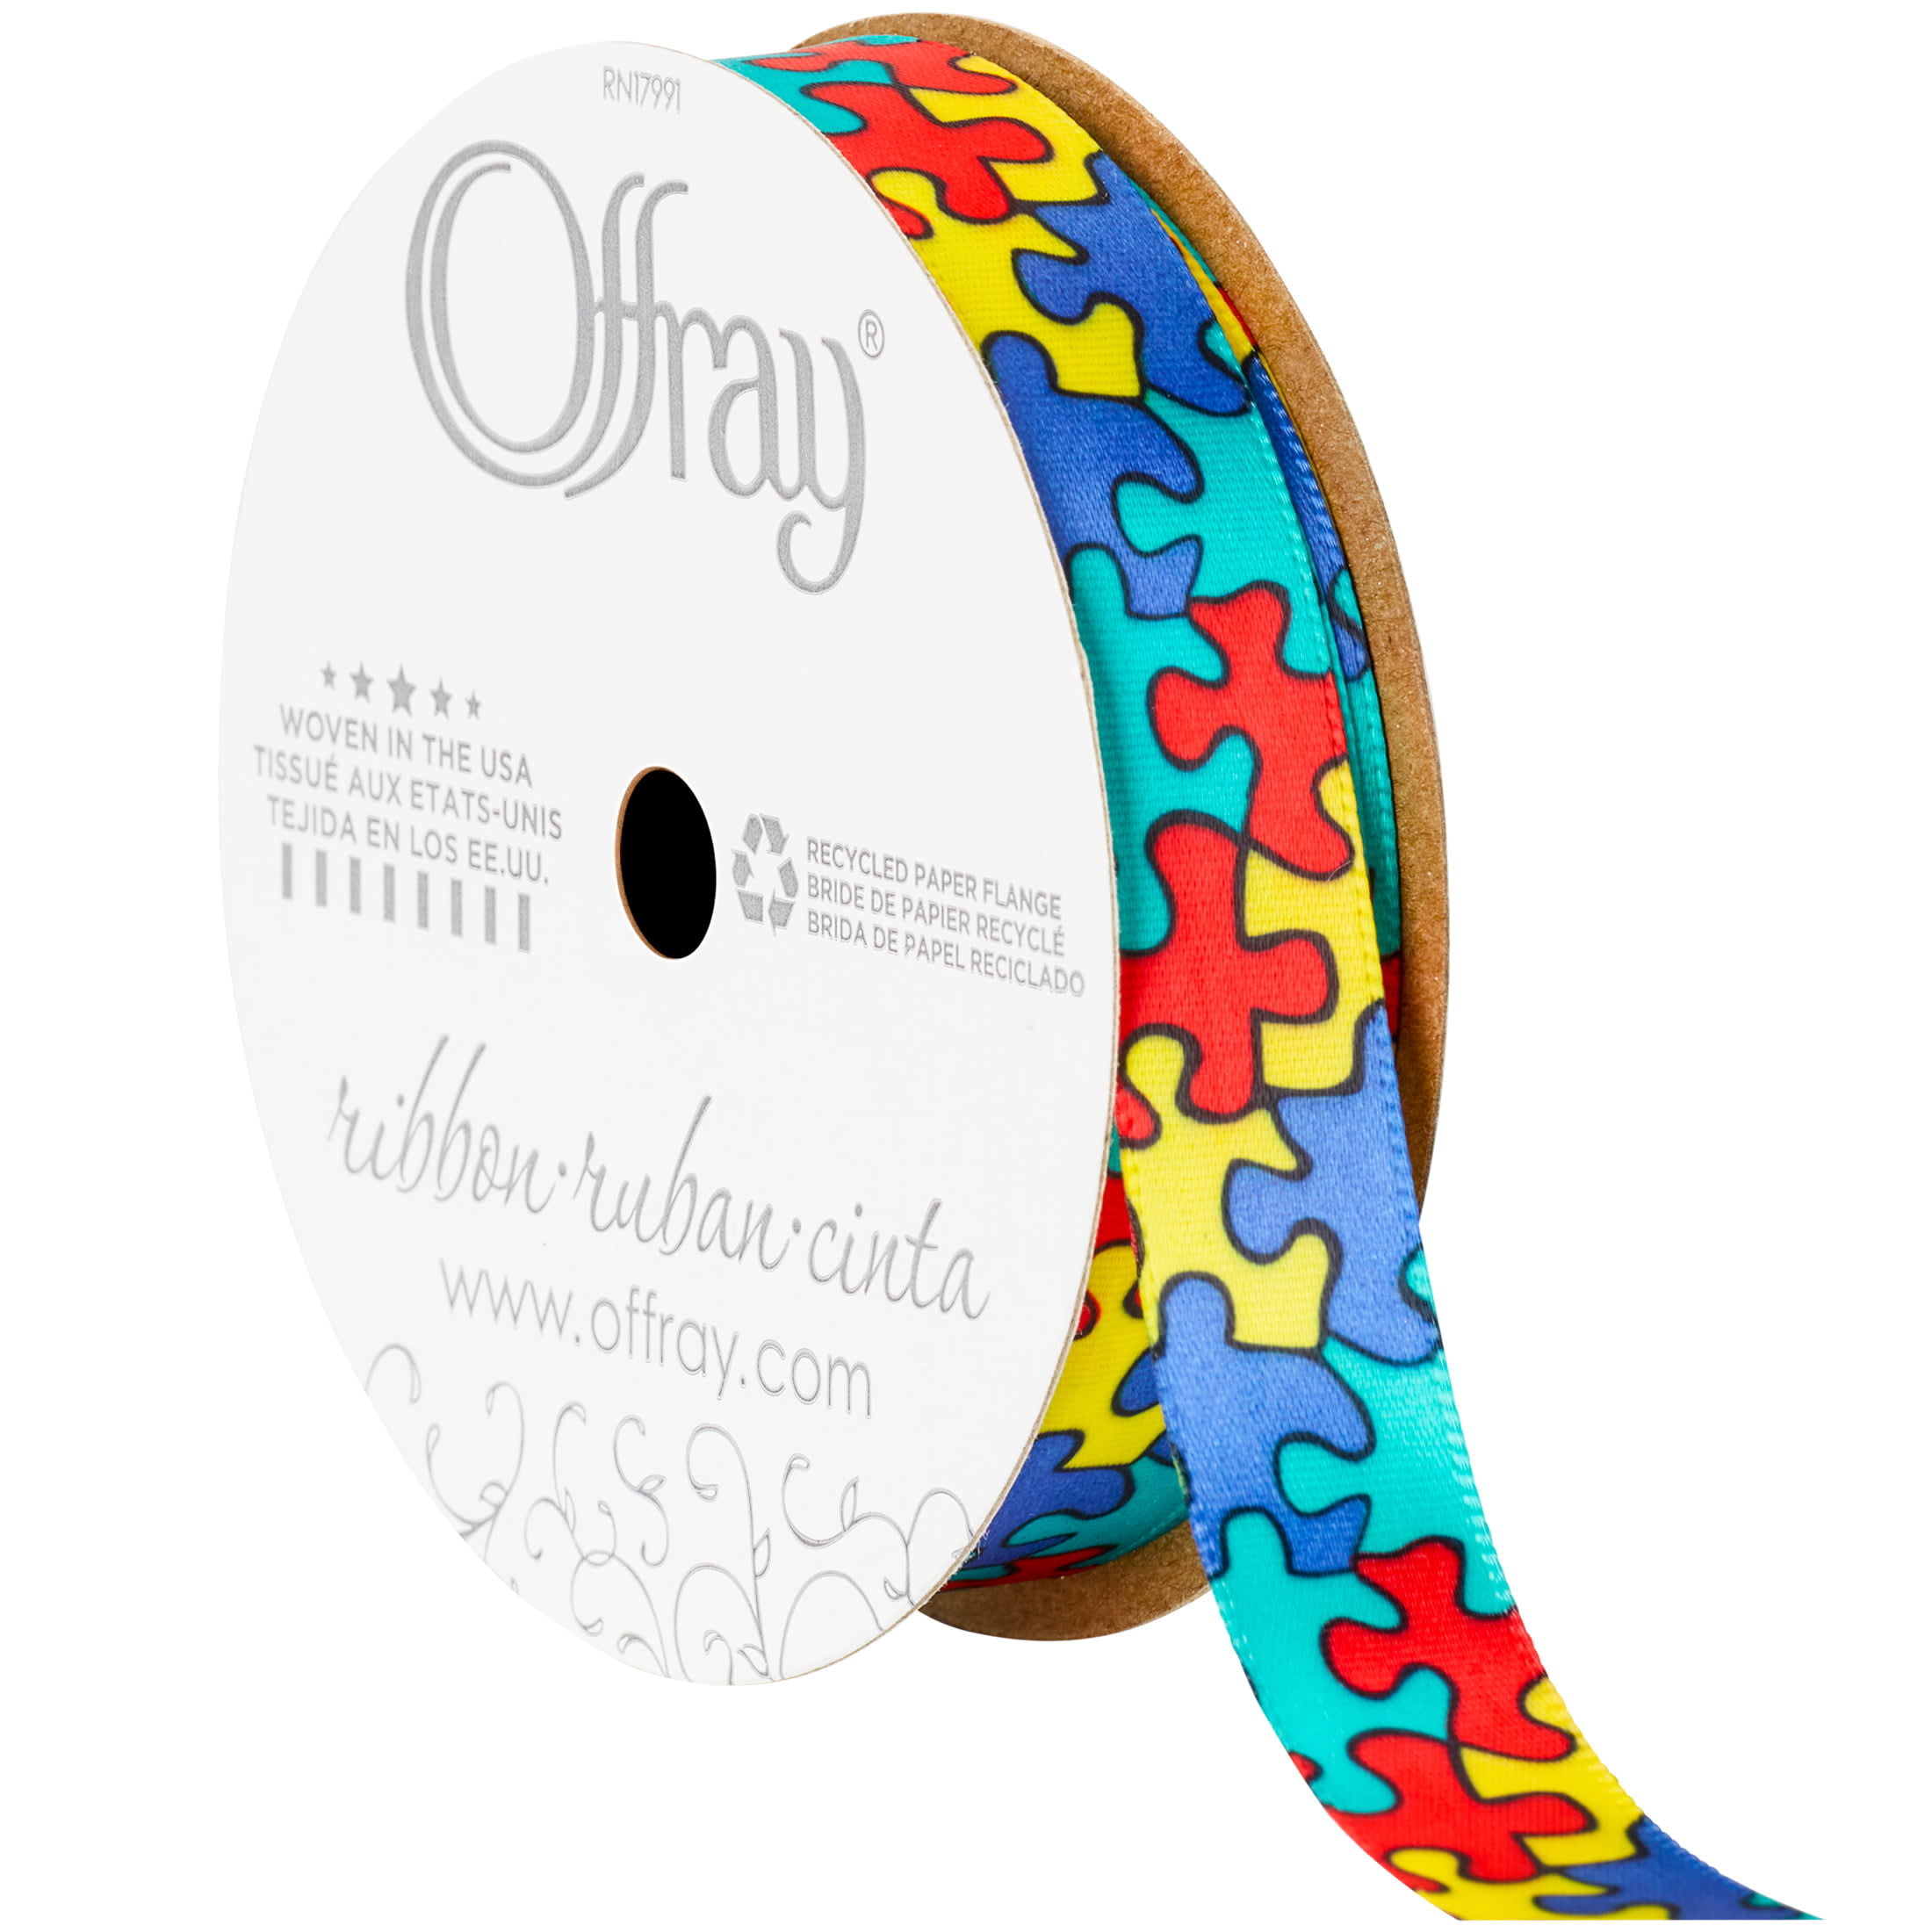 Offray Ribbon, Antique White 1 1/2 inch Single Face Satin Polyester Ribbon,  12 feet - DroneUp Delivery